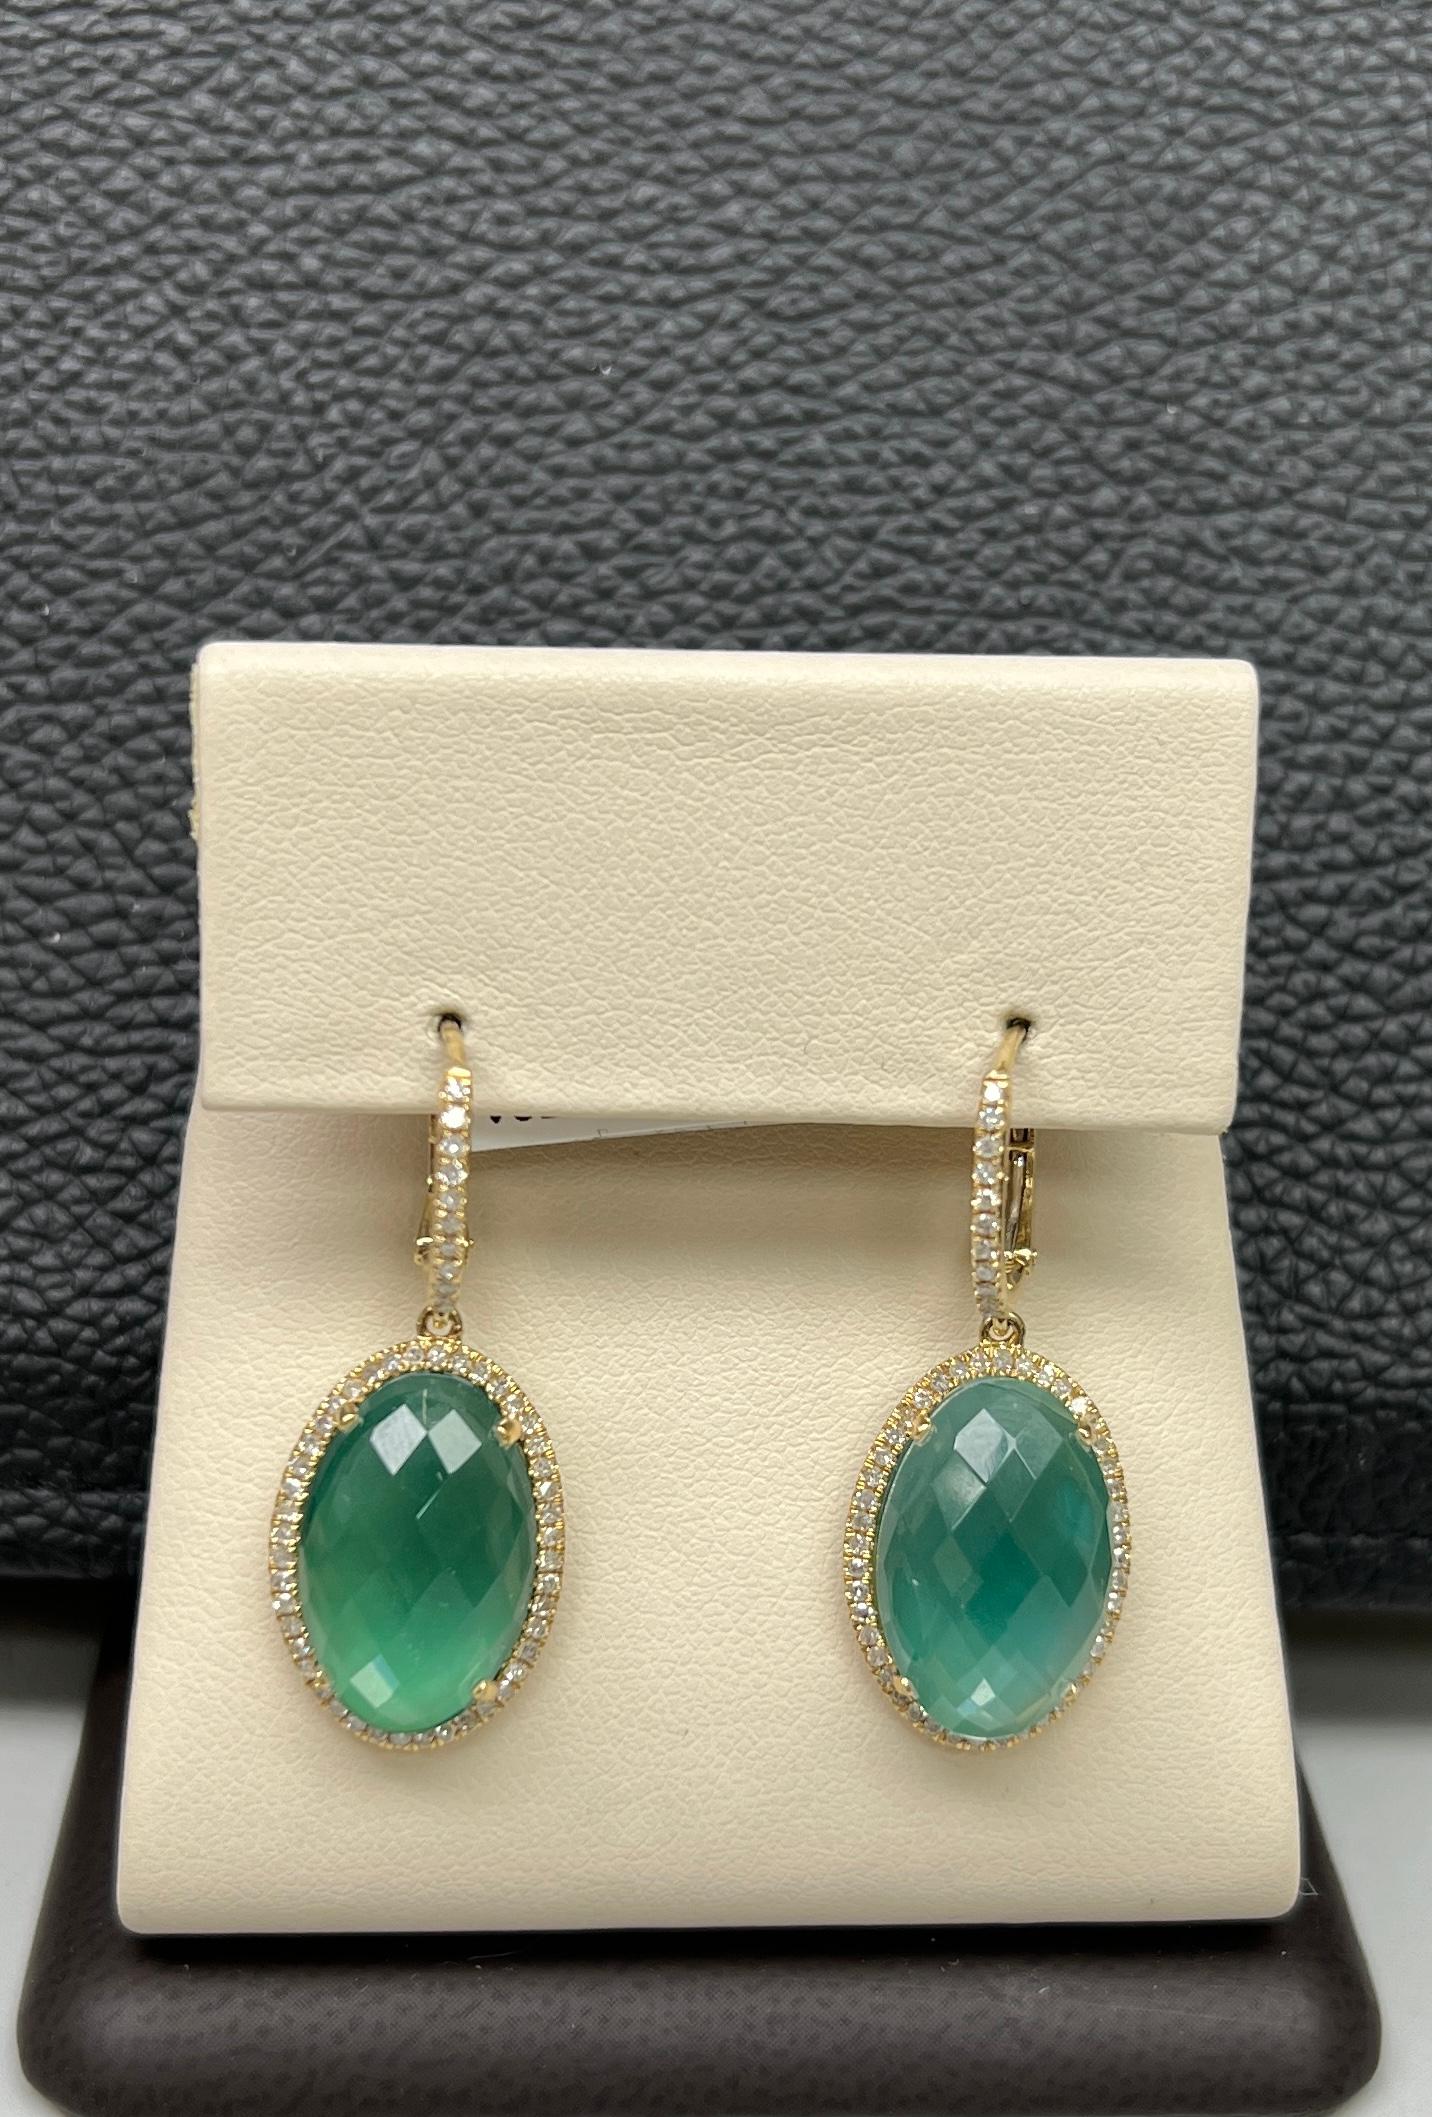 14K Solid Yellow Gold Diamond Green Agate Earrings 
High Polish Finish  
Handset Natural White Diamond .47 Total Carat Weight 
Excellent Full Cut Round Stones H Color SI 
Natural Oval Shape Green Agate Gem Stones  
Natural White Topaz Backing
Brand